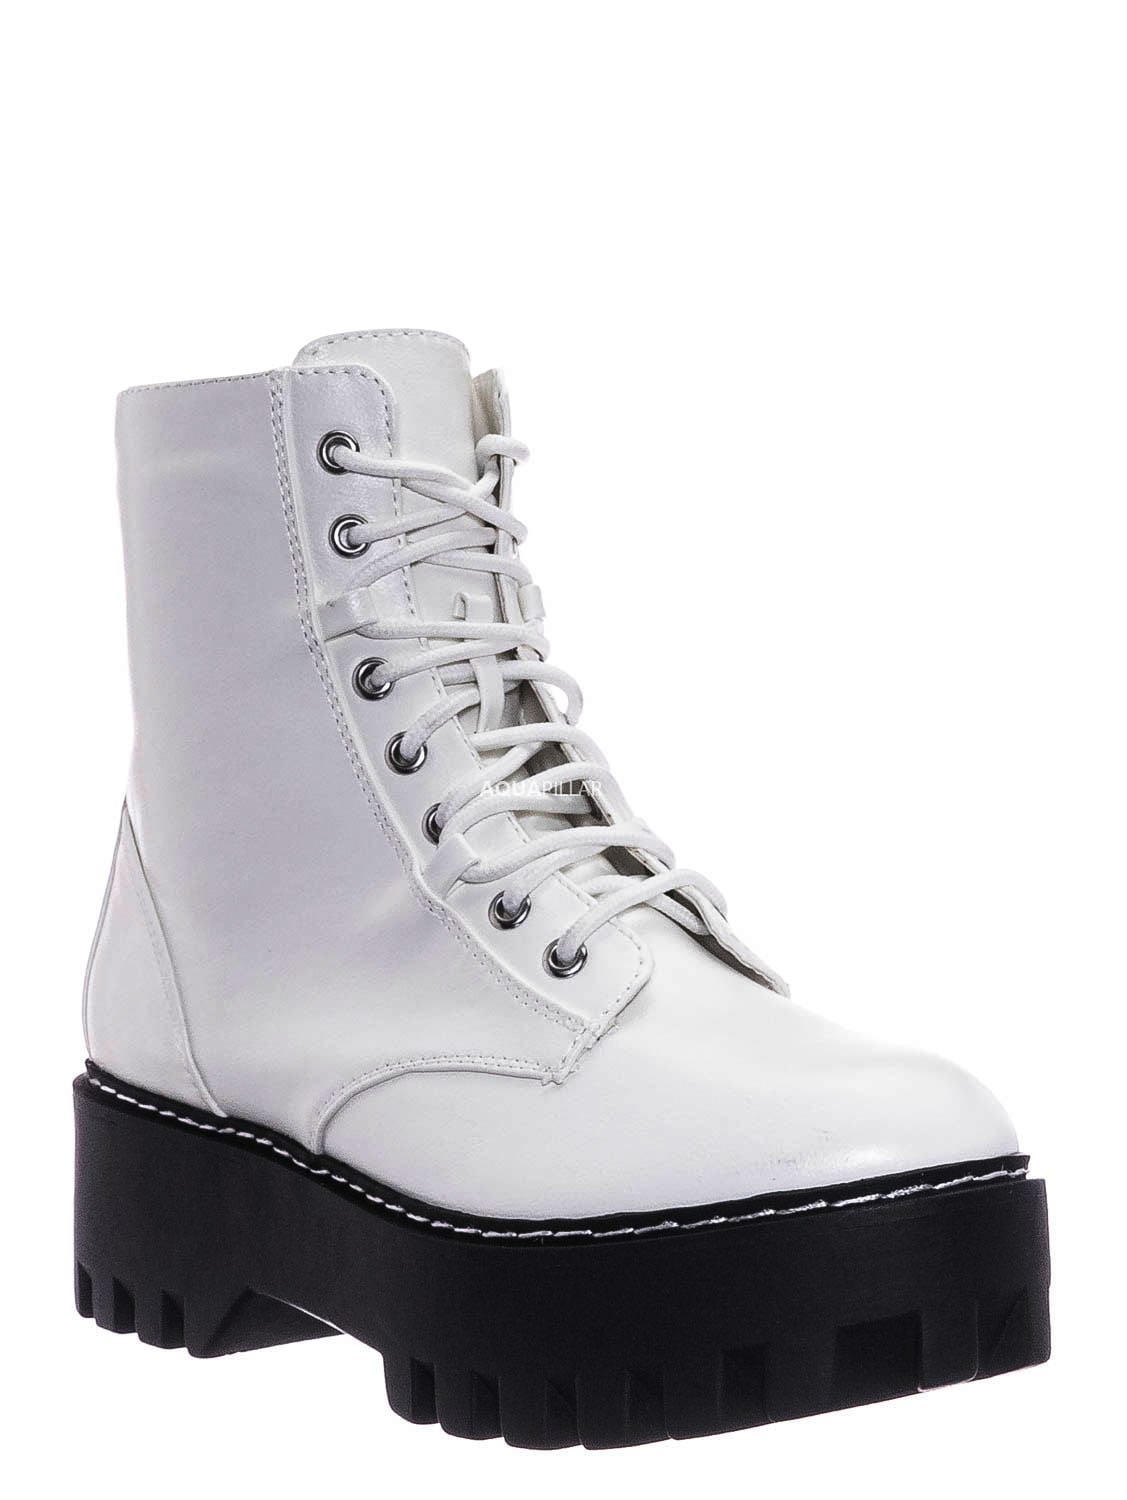 Firm Lace Up Combat Bootie Fashion Military Threaded Lug Sole Ankle Boots 